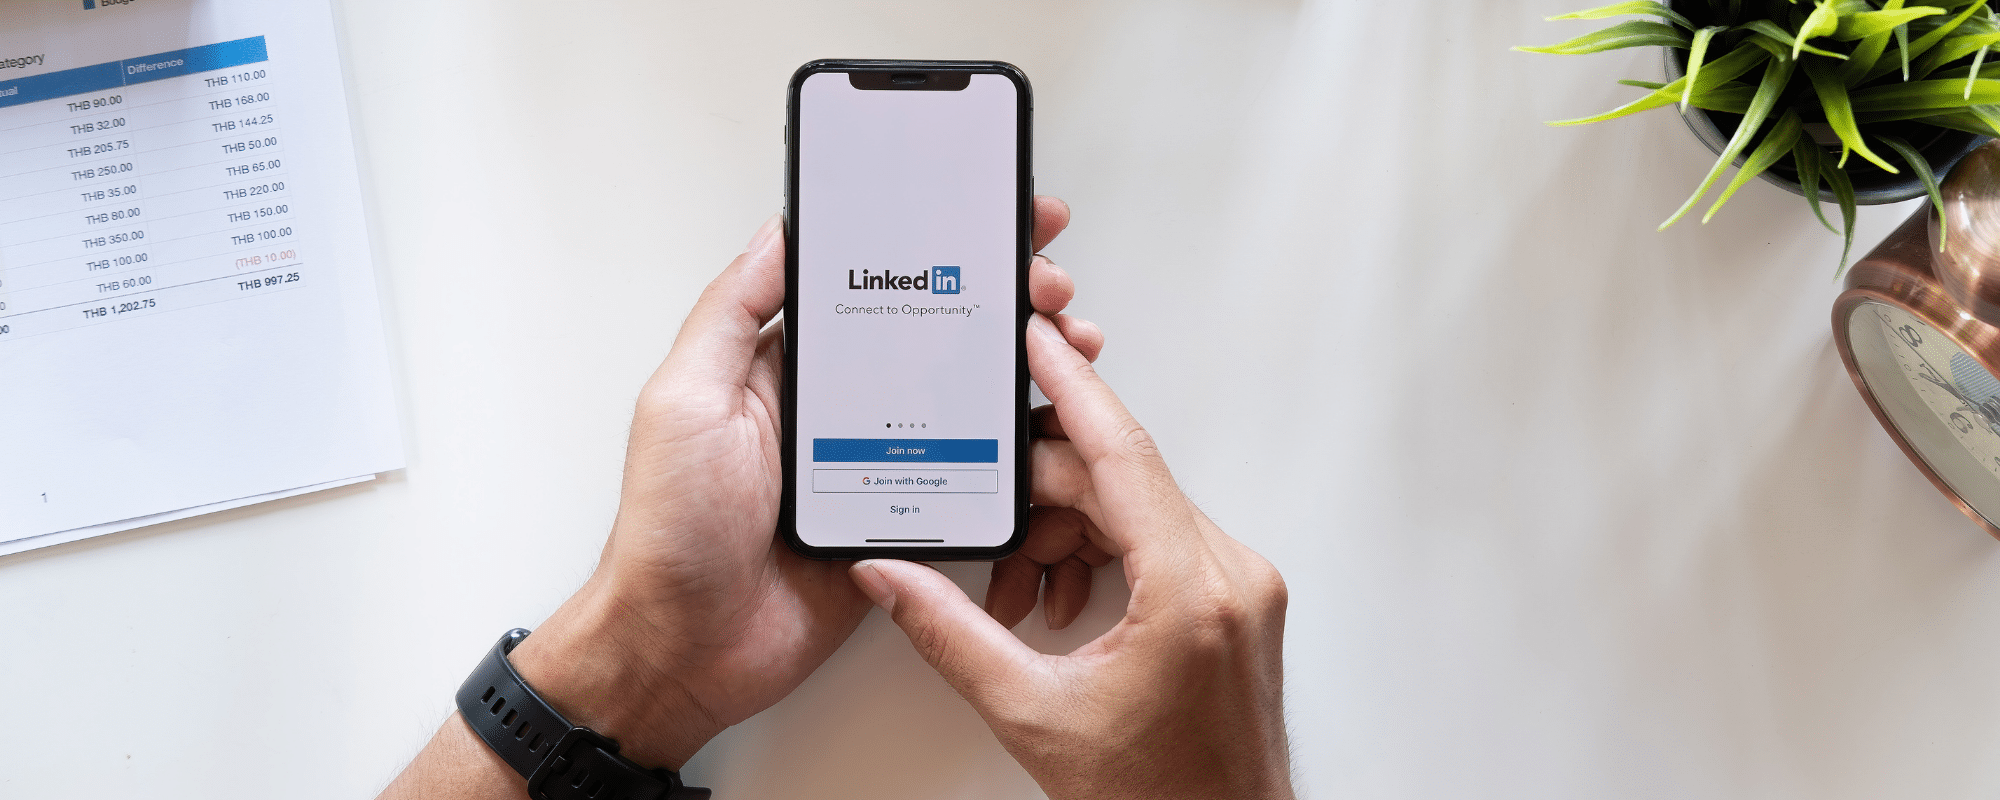 5 Tips to Make Your LinkedIn Profile Stand Out to Executive Recruiters Banner